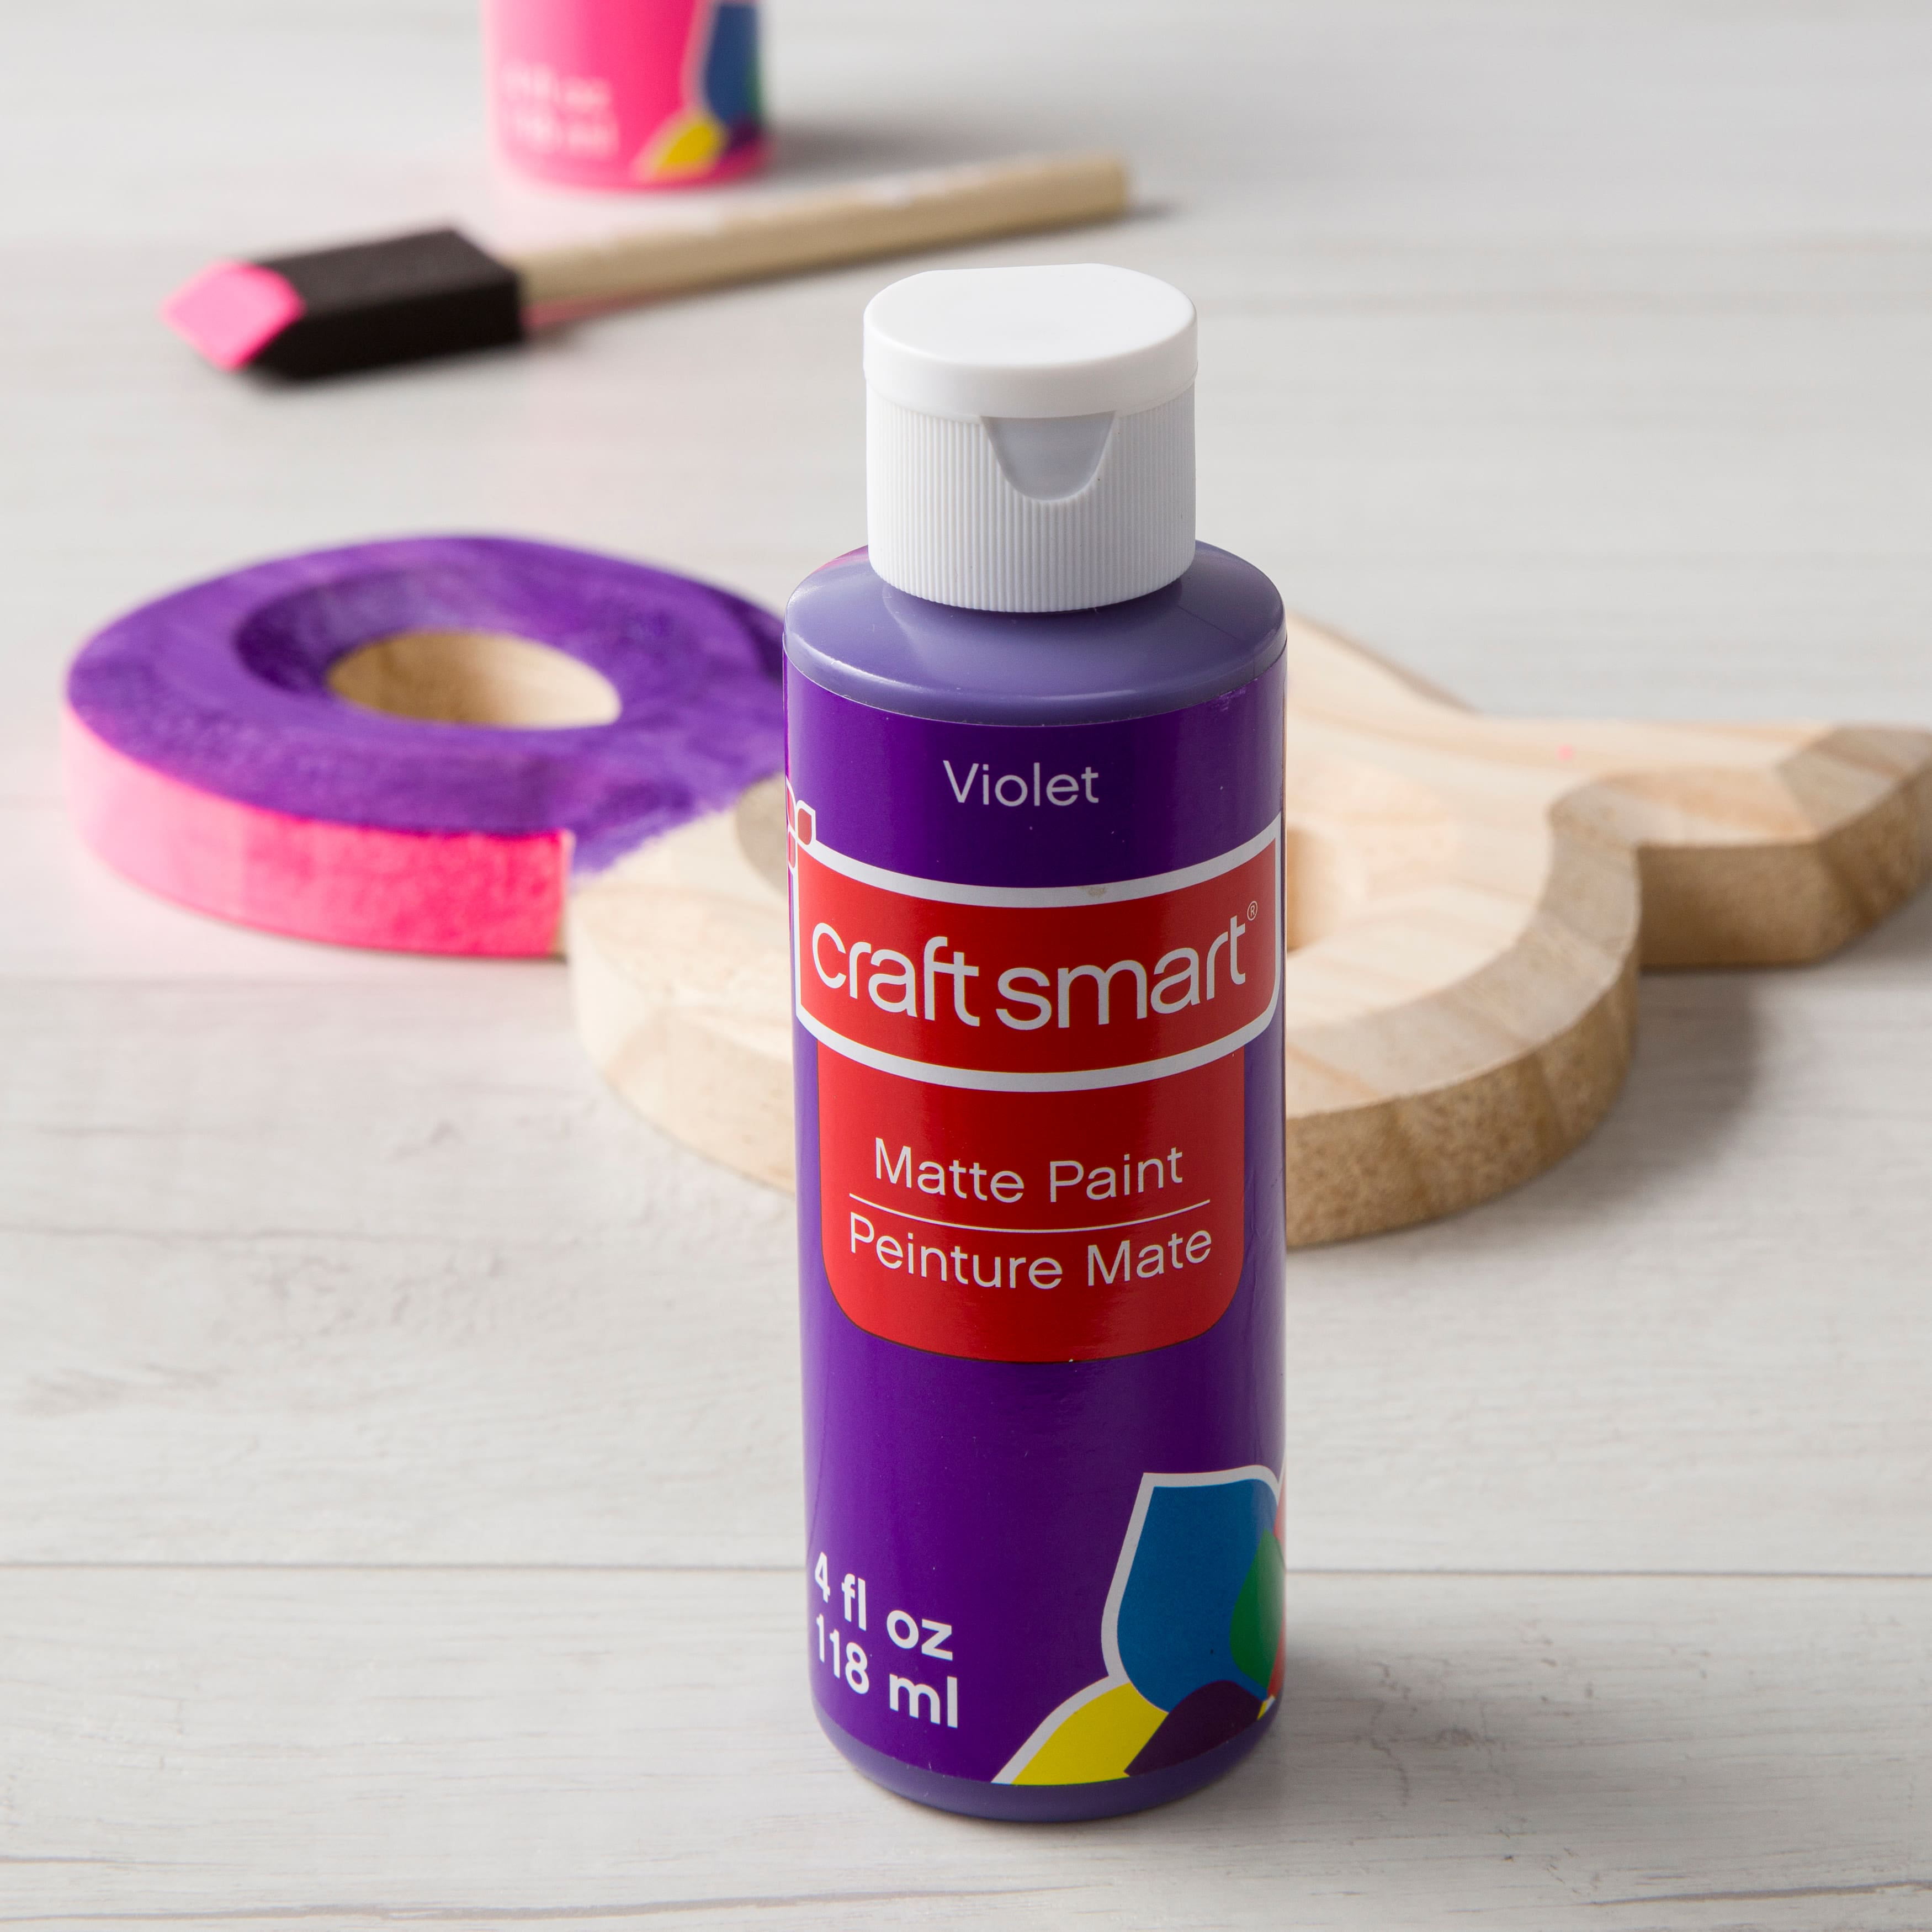 Acrylic Paint by Craft Smart®, 8oz., Michaels